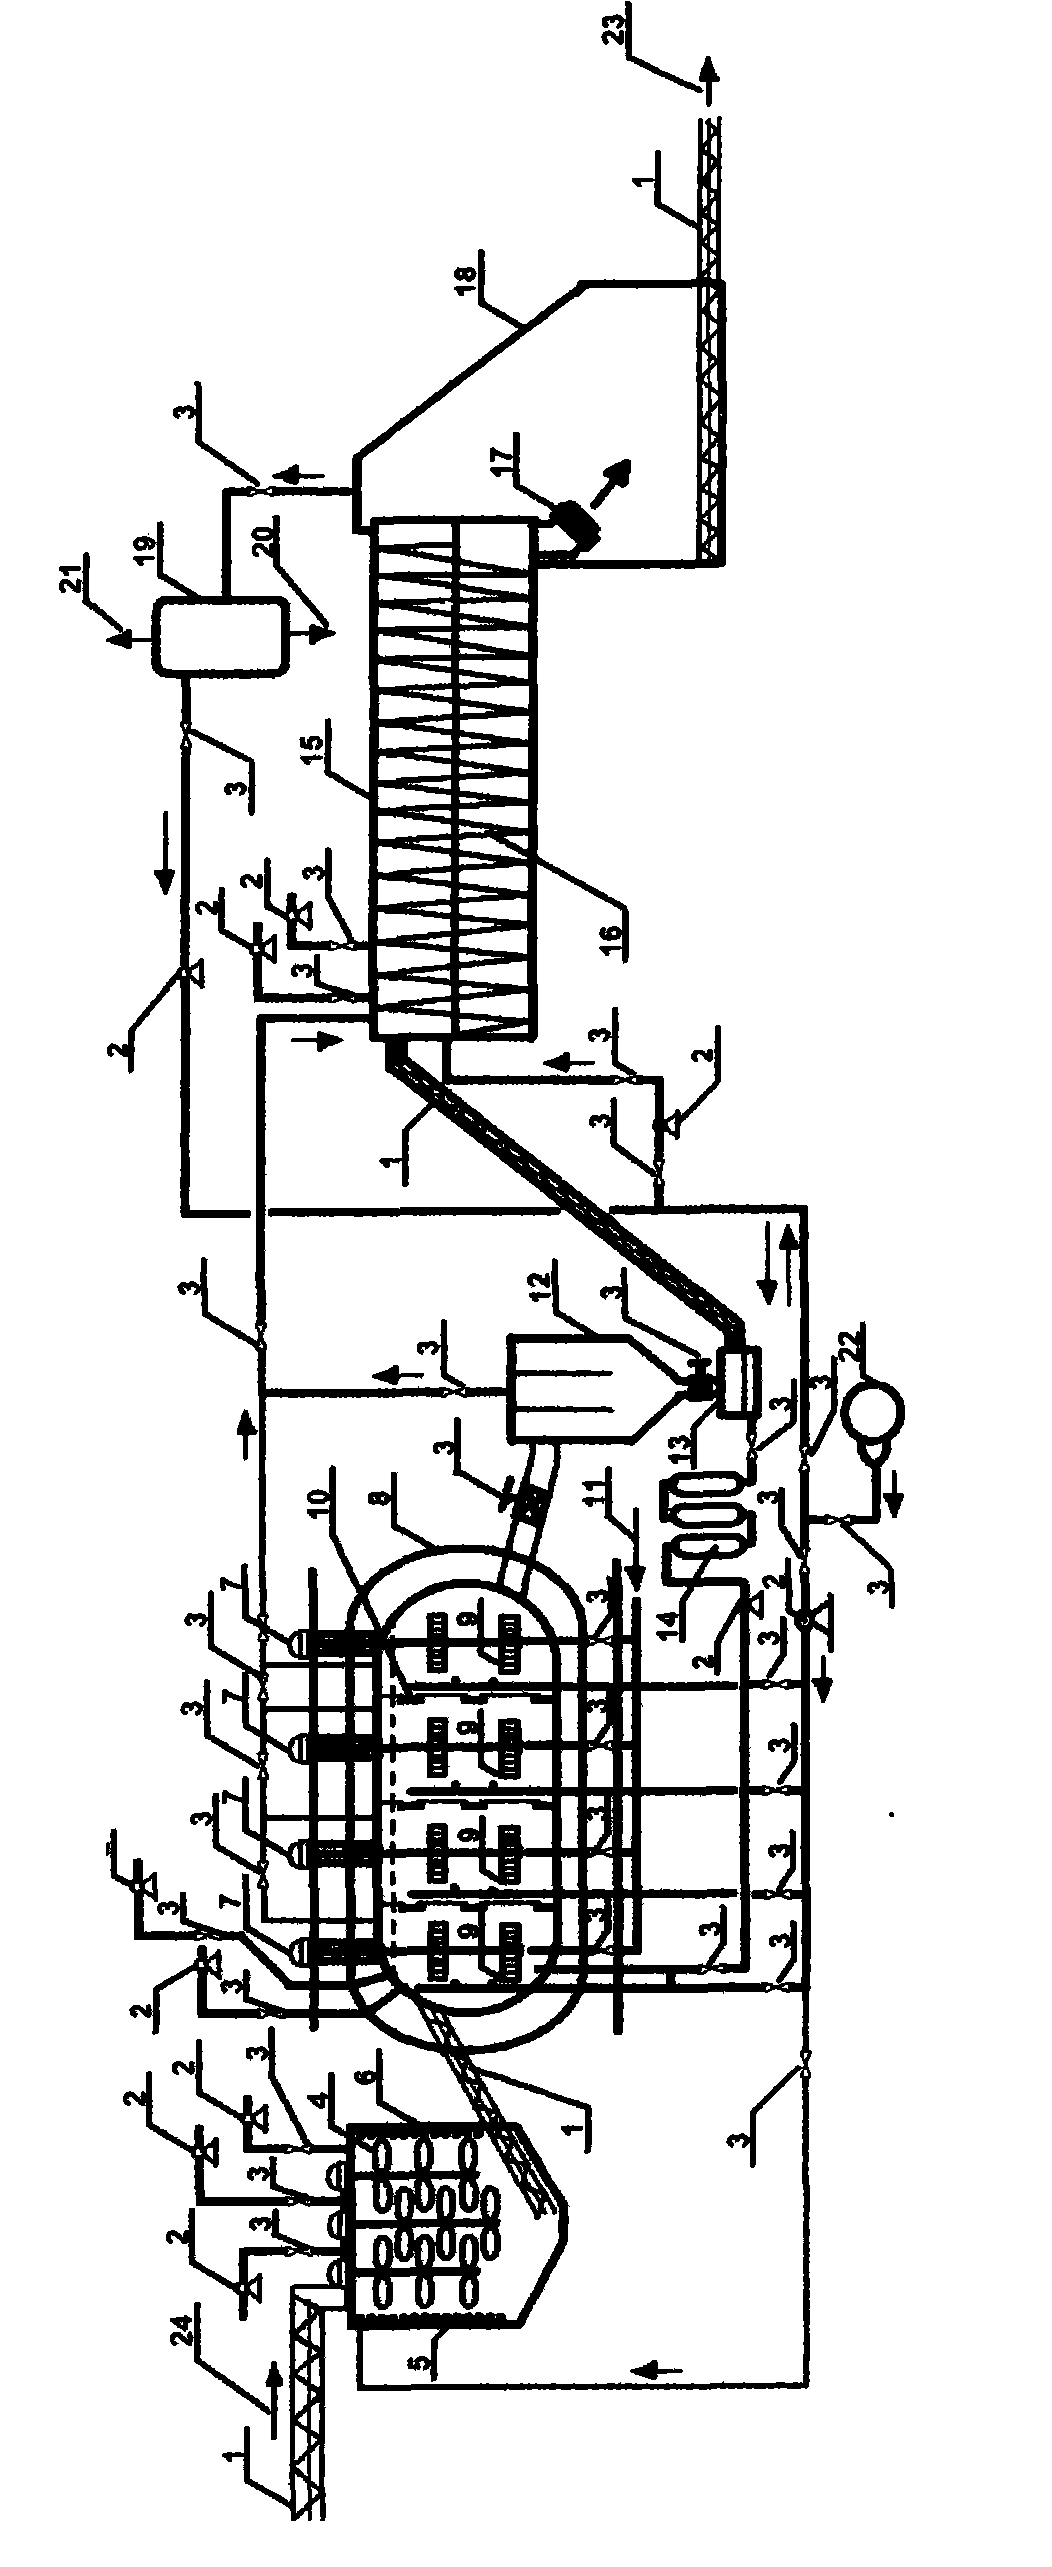 High-speed composting process and apparatus